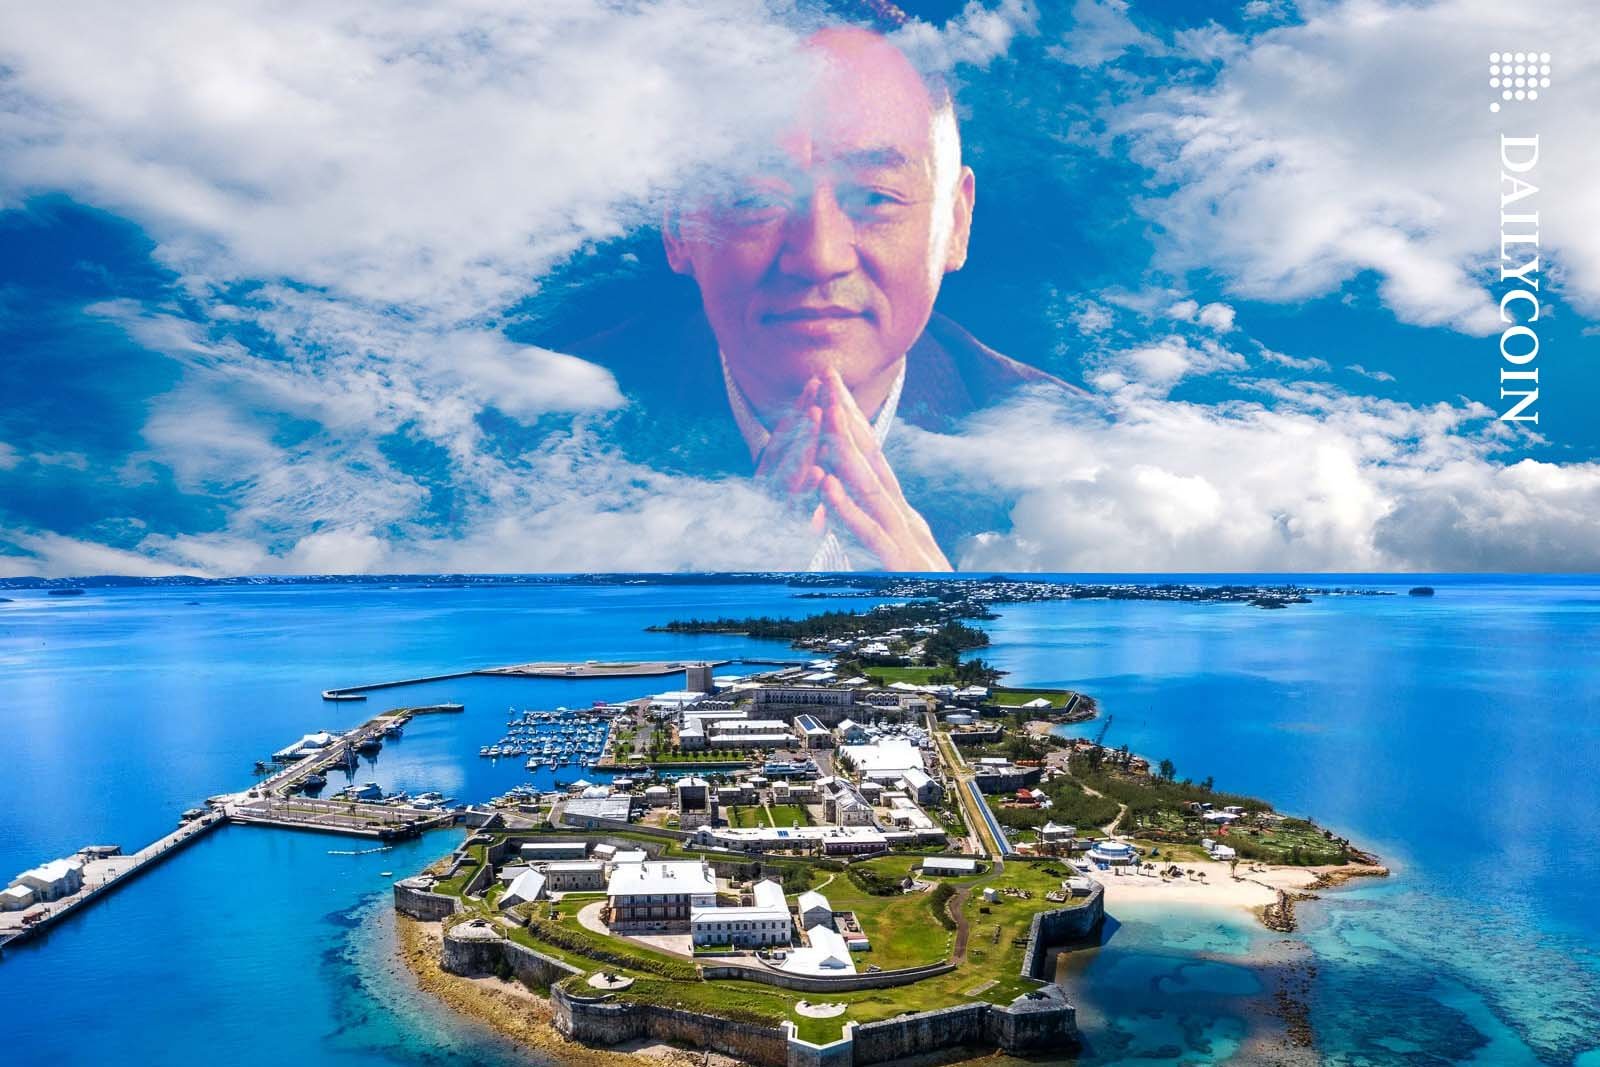 Dr Xiao Feng looking over a Bermuda island smiling.